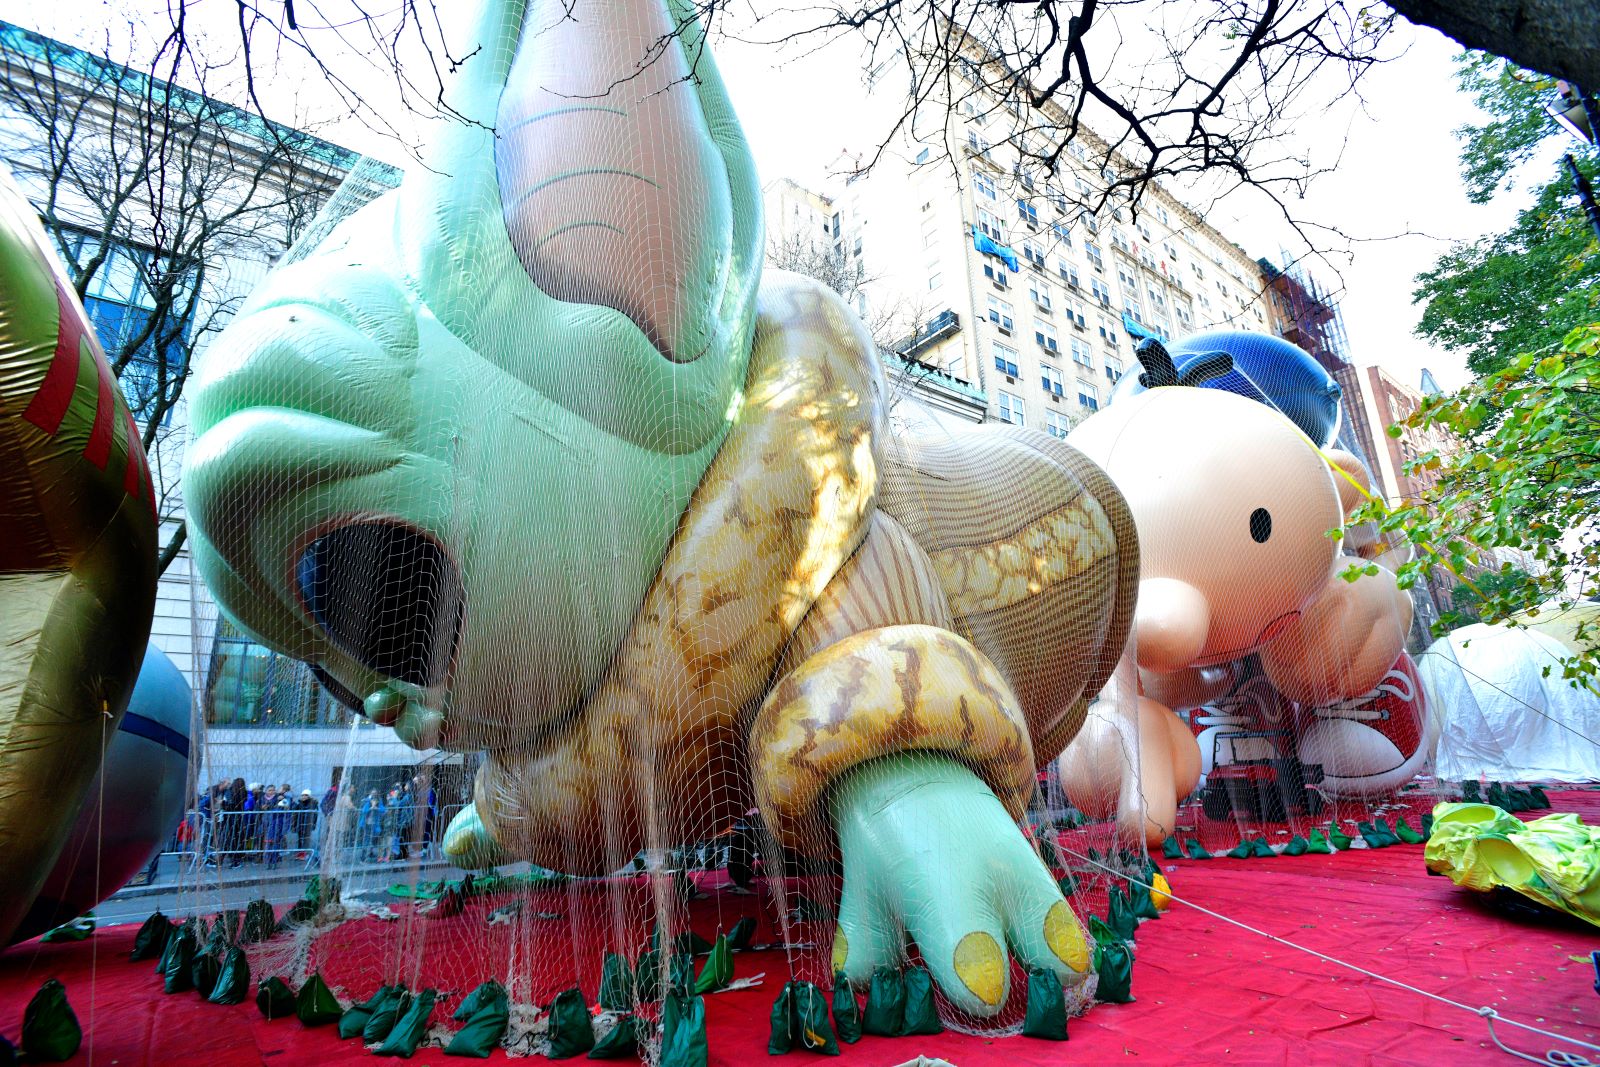 Grogu von Finkois seen during the 96th Macy's Thanksgiving Day Parade - Balloon Inflation on November 23, 2022 in New York City. (Photo by Eugene Gologursky/Getty Images for Macy's, Inc.)